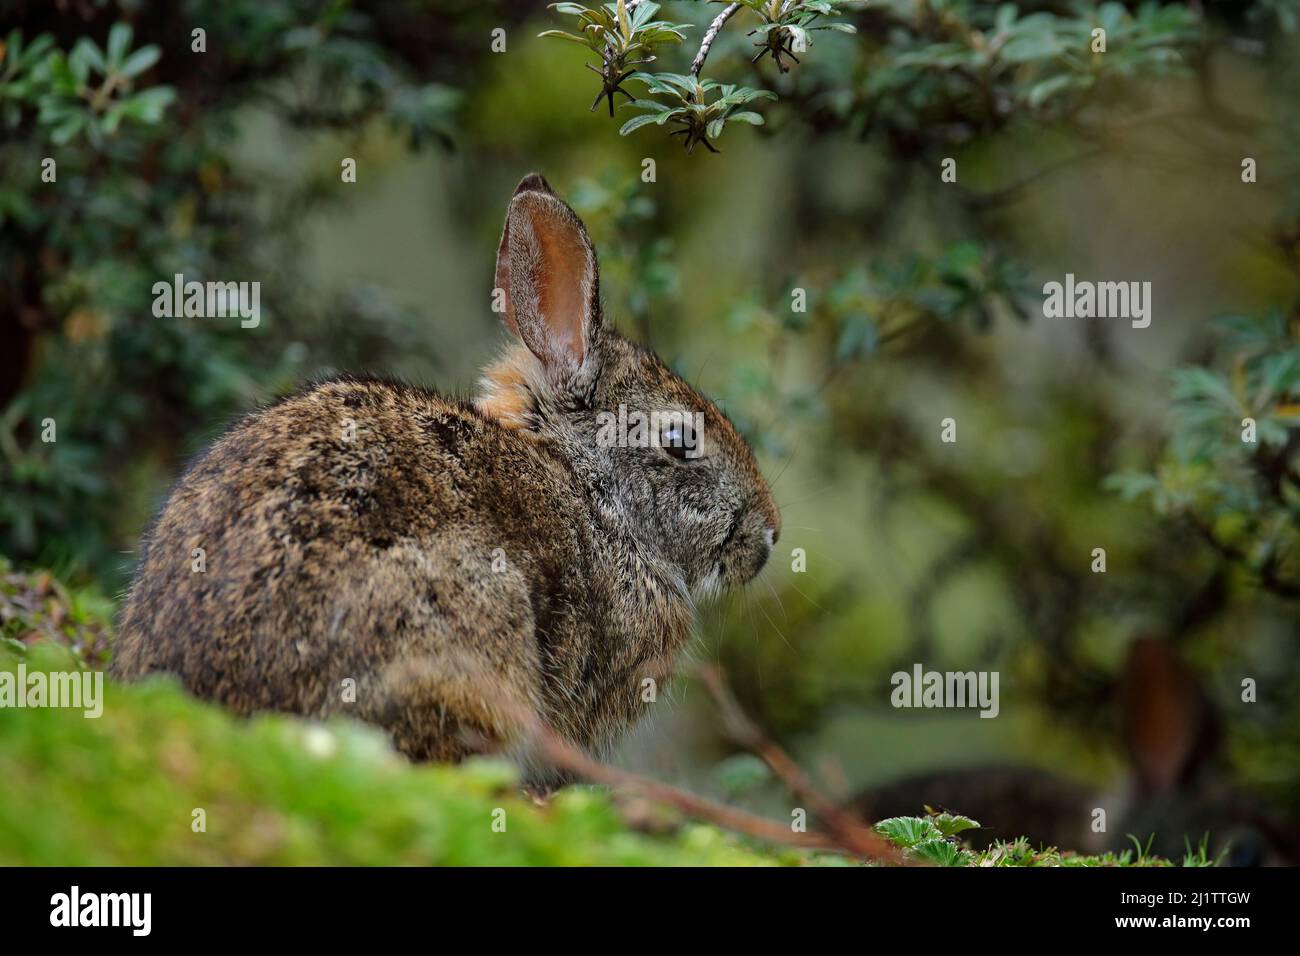 Sylvilagus brasiliensis, small cute rabbit from high-altitude Andes slopes, Antisana NP, Ecuador. Hare in the nature habitat, animal hidden in green v Stock Photo